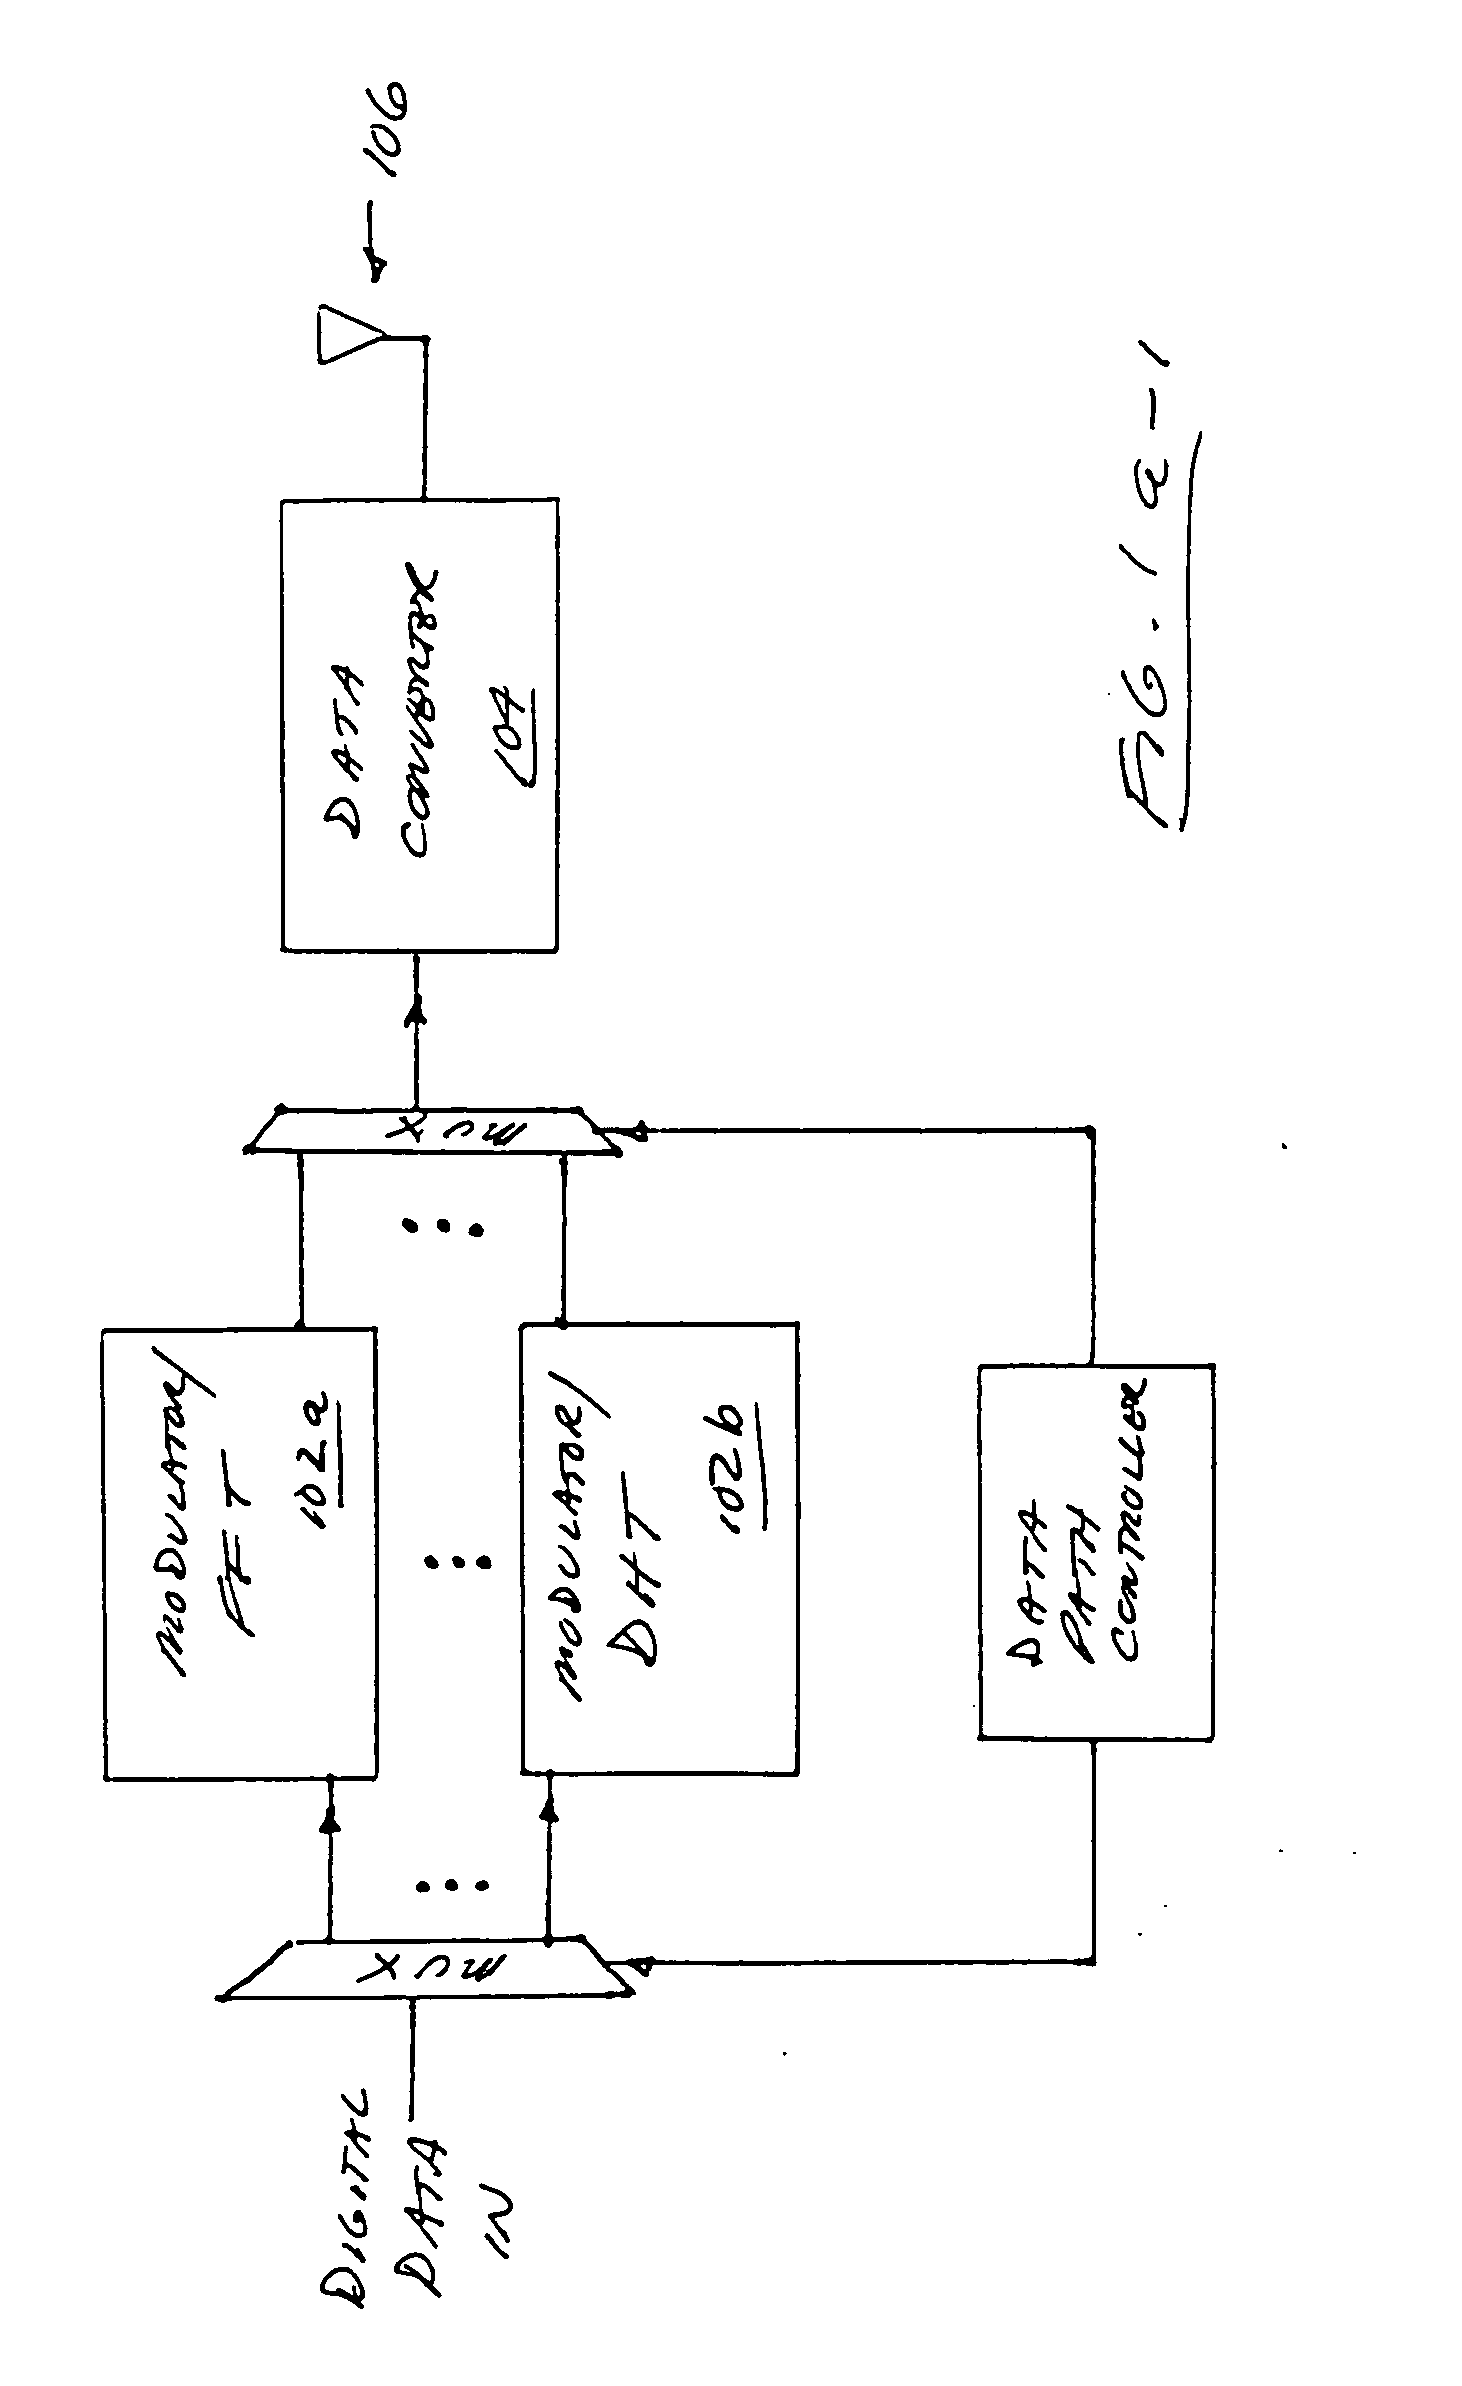 Scalable transform wideband holographic communications apparatus and methods